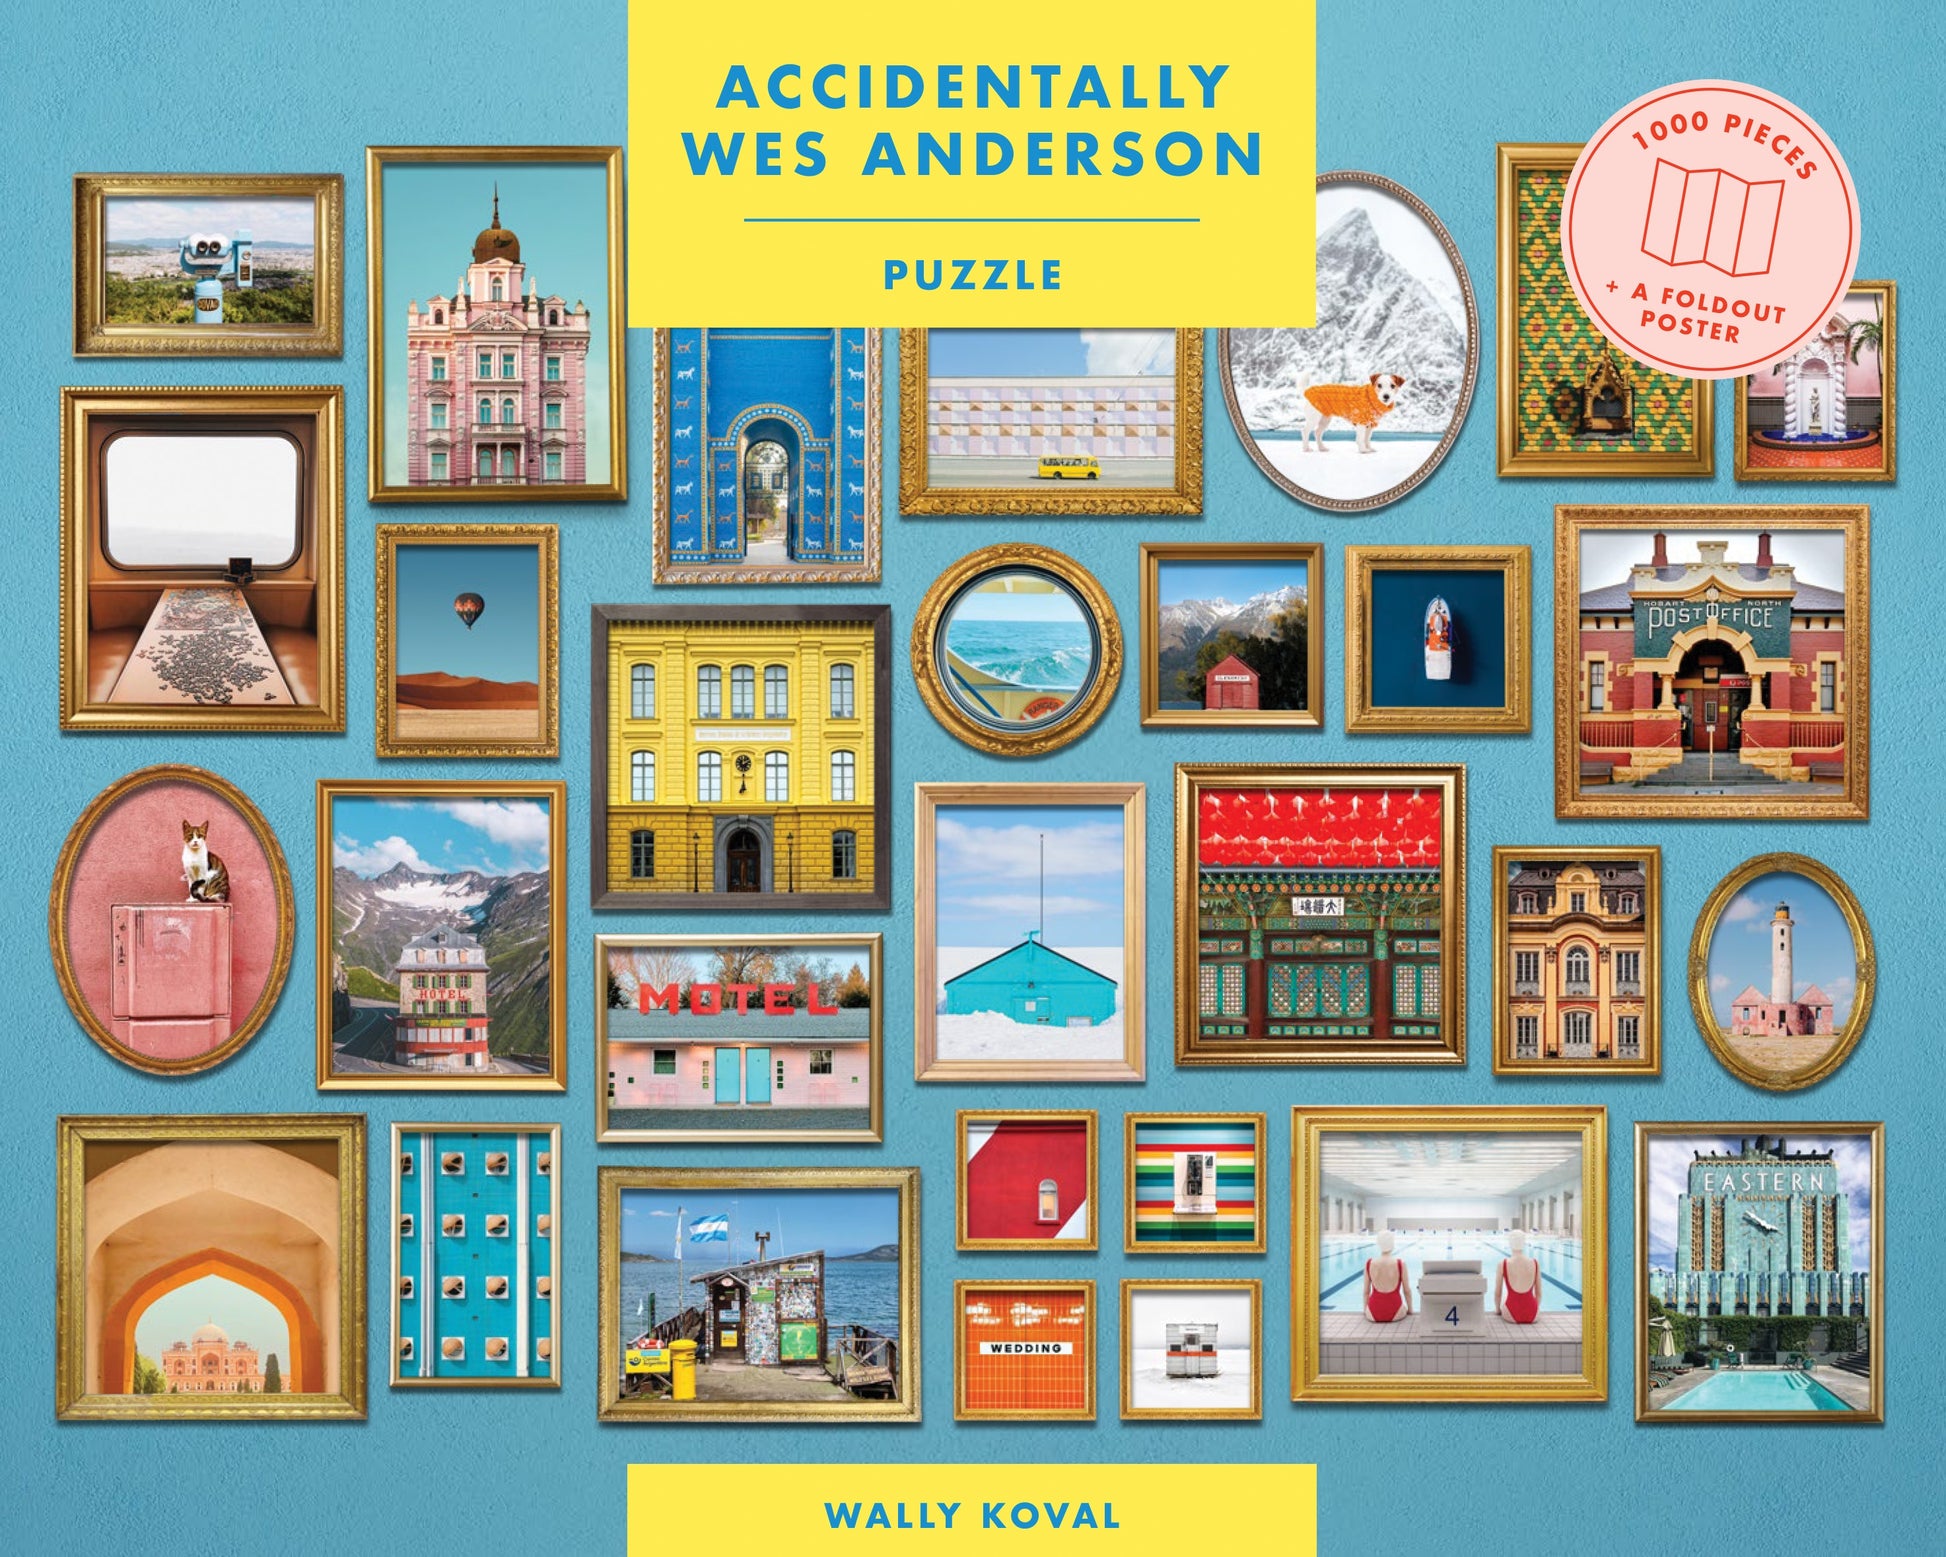 Accidentally Wes Anderson Jigsaw Puzzle by Wally Koval